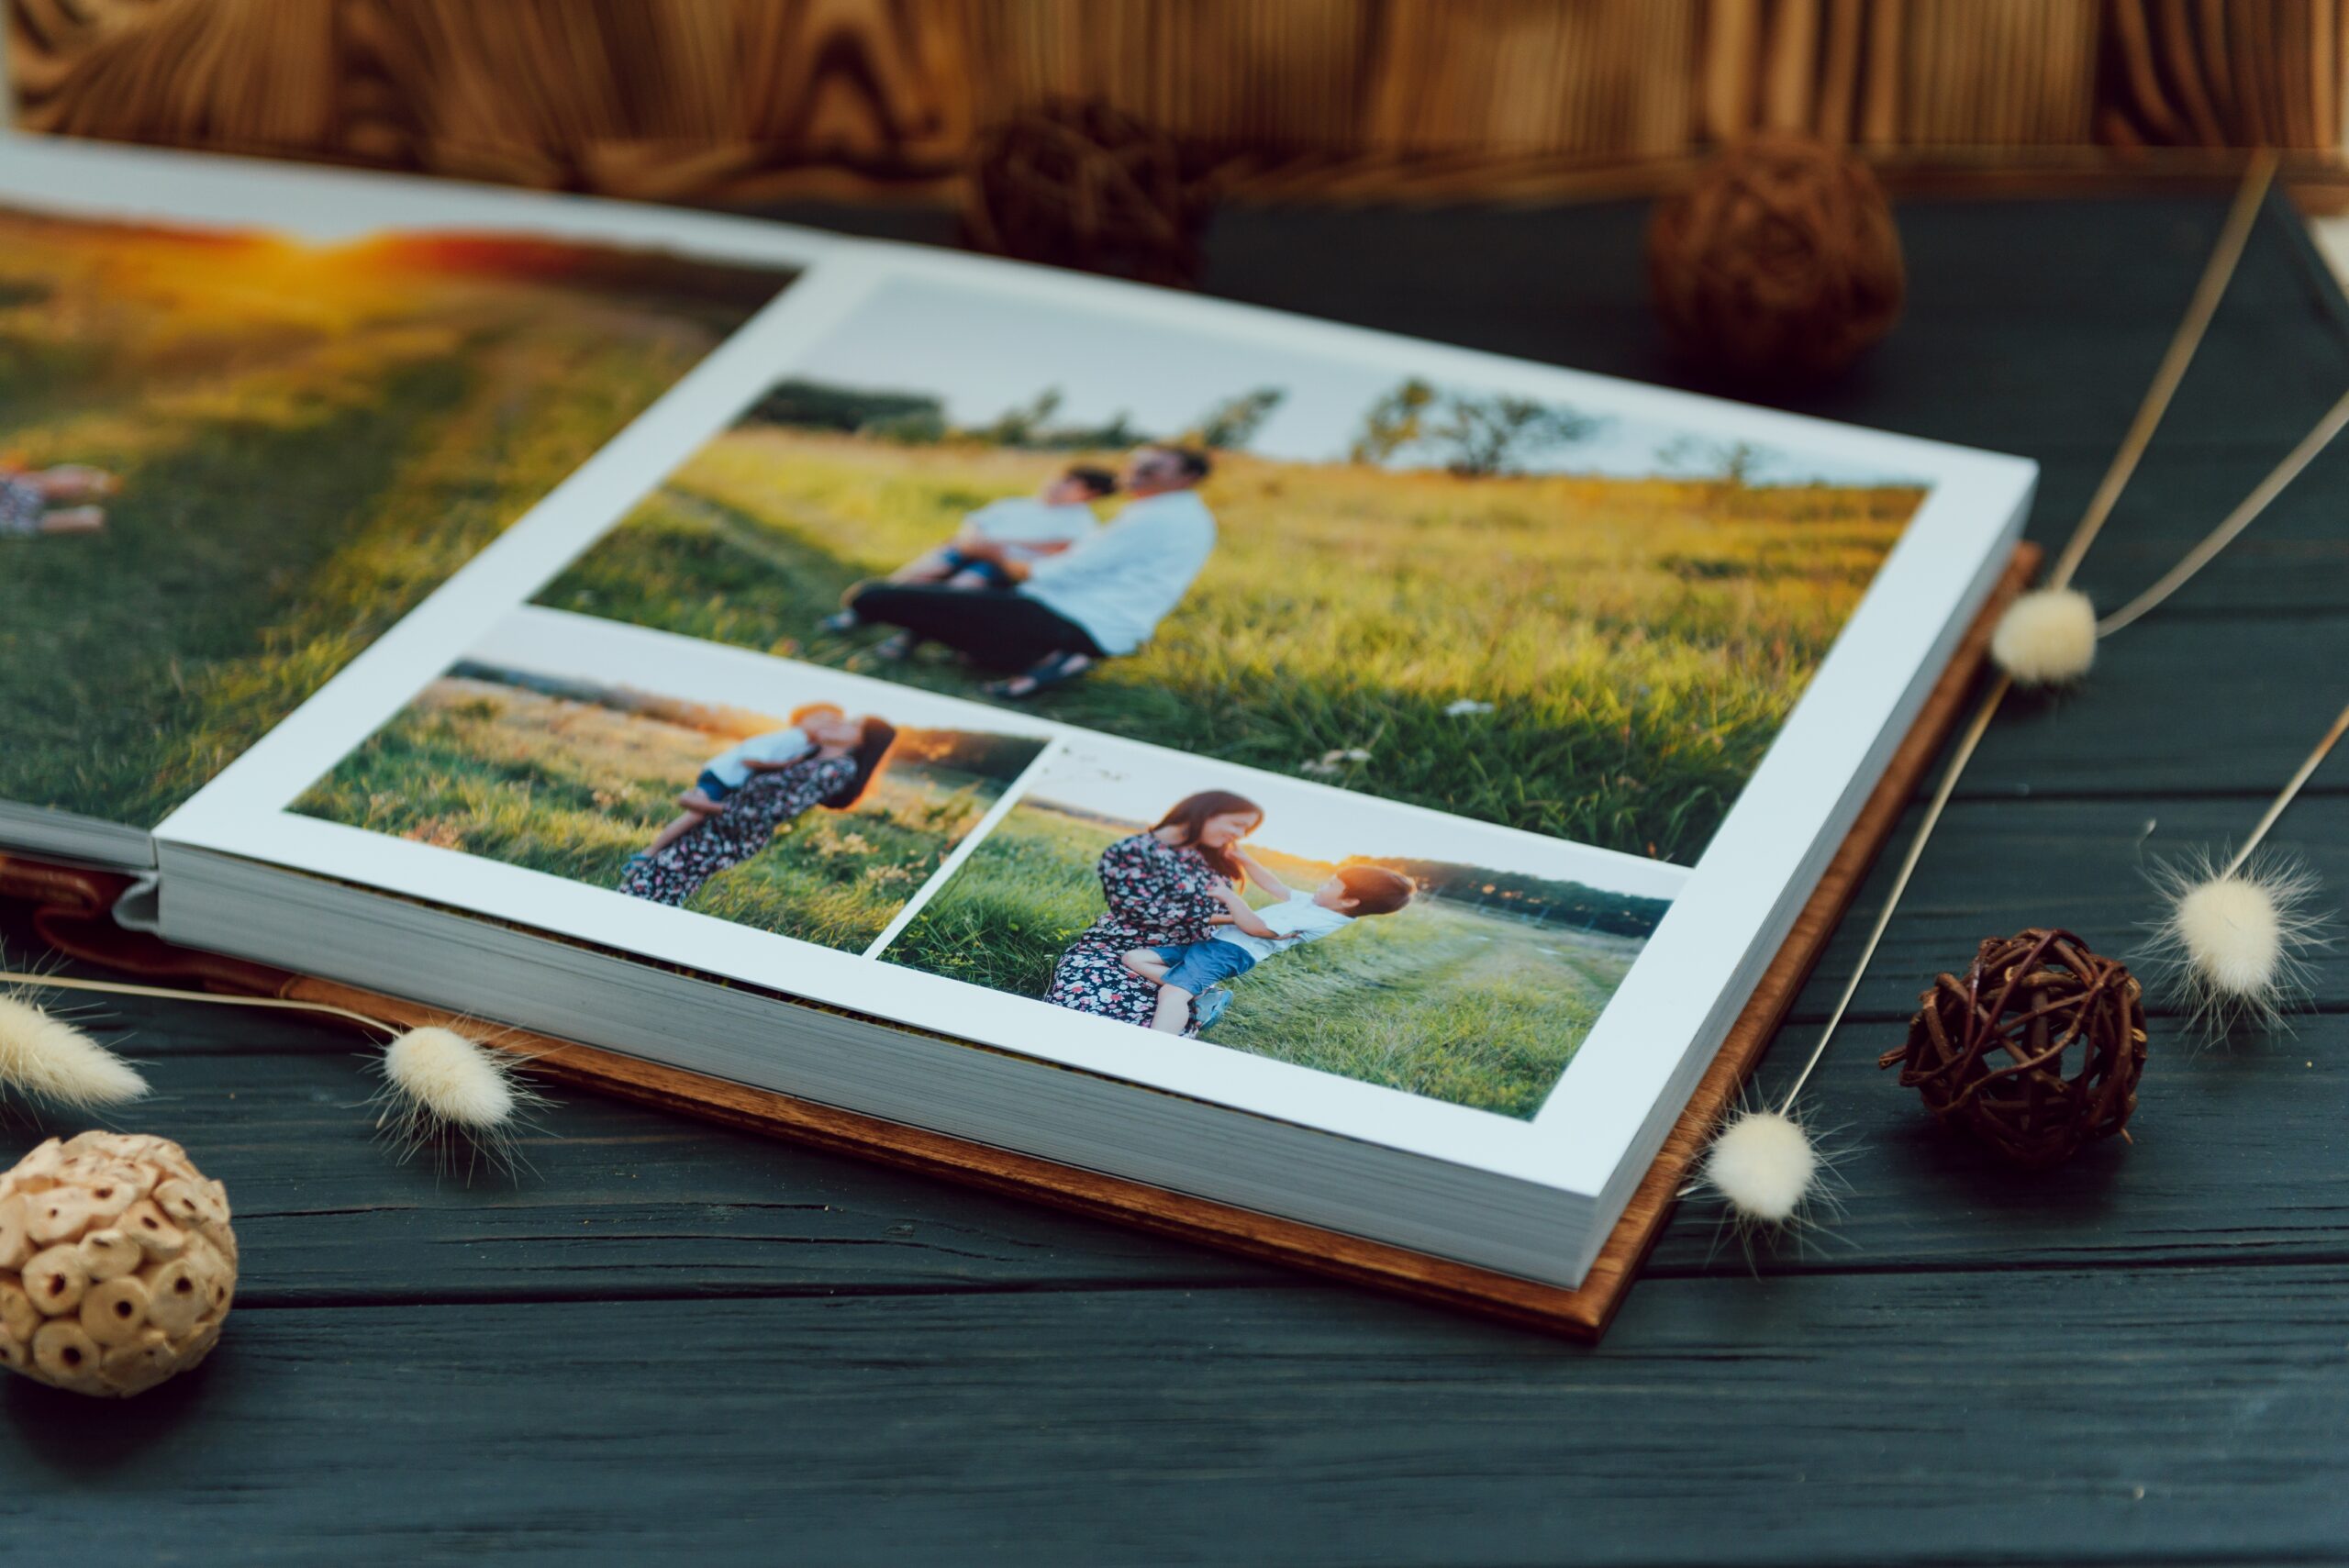 Reasons Why Custom Photo Books Make the Best Gift for Every Occasion